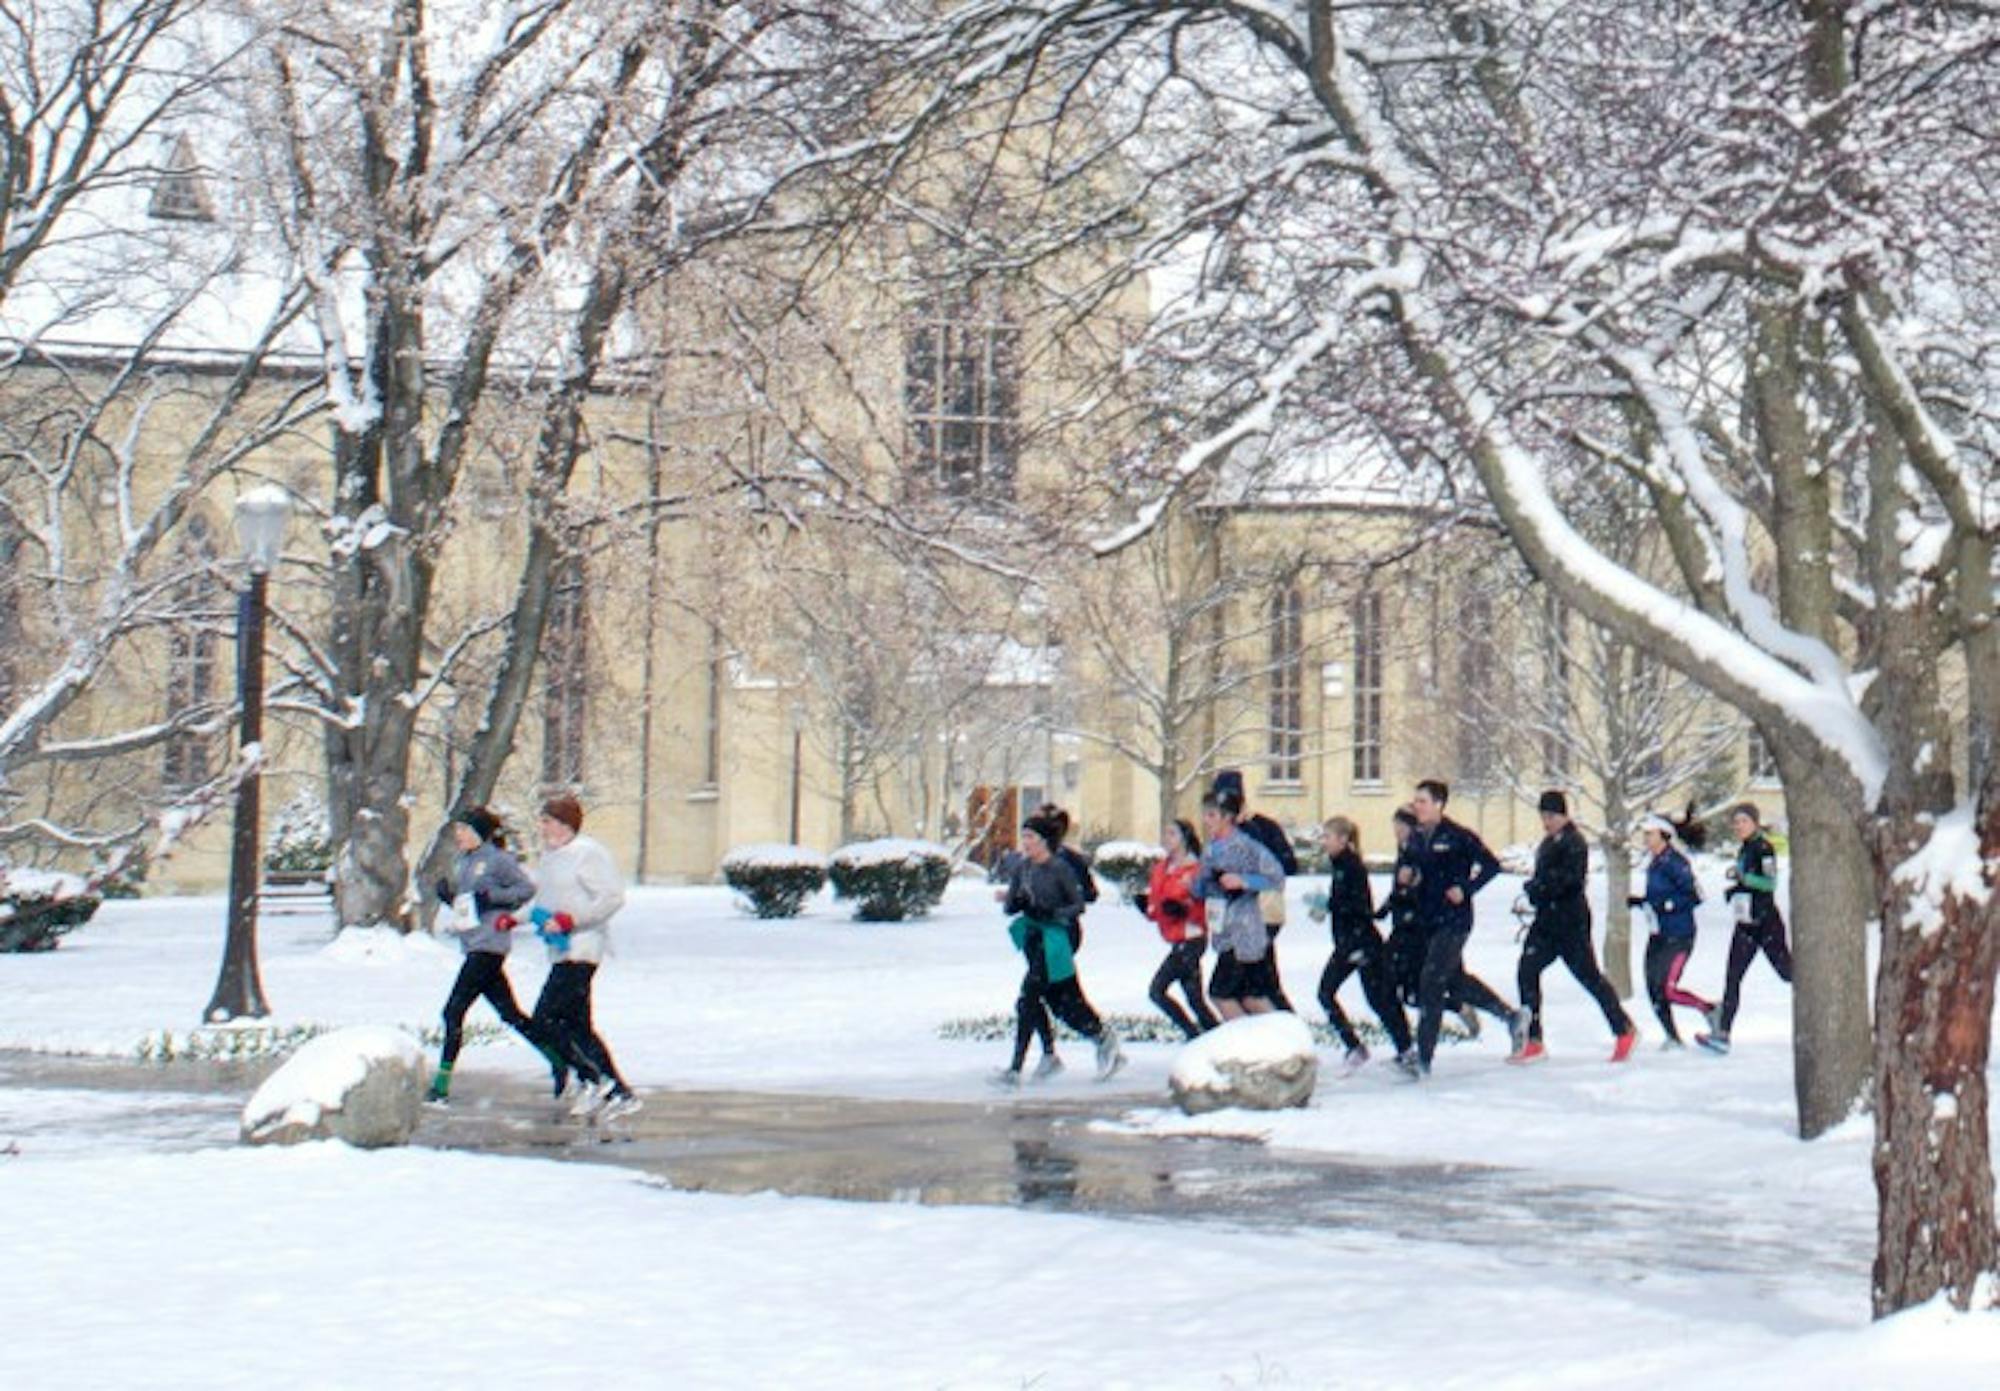 Students and community members run through campus after the Holy Half Marathon was cancelled due to unforeseen icy conditions.